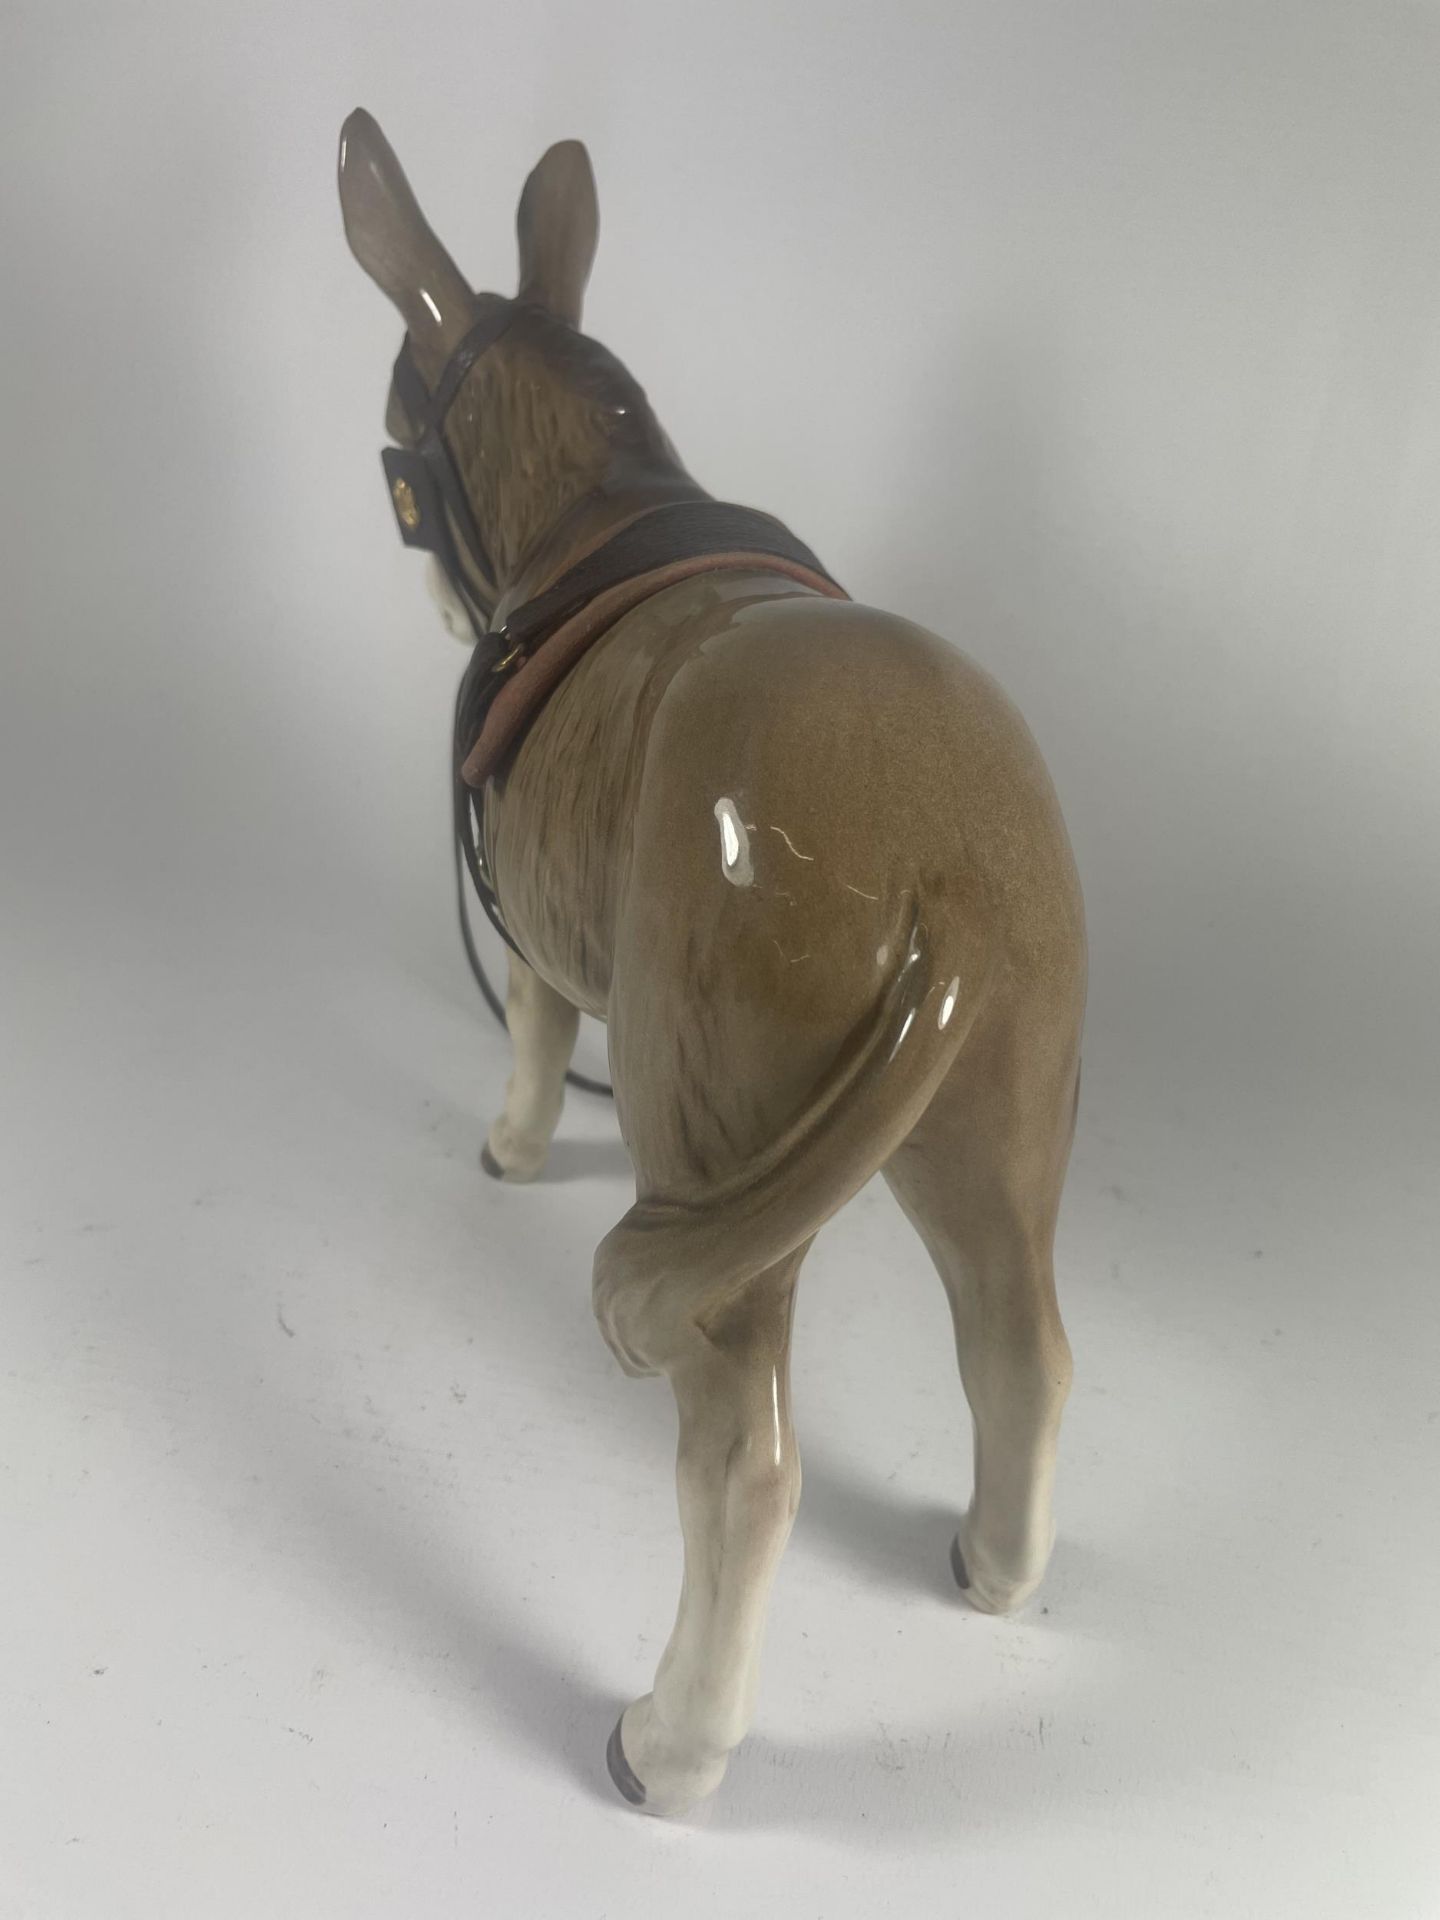 A SYLVAC DONKEY FIGURE WITH LEATHER REIGNS - Image 2 of 4